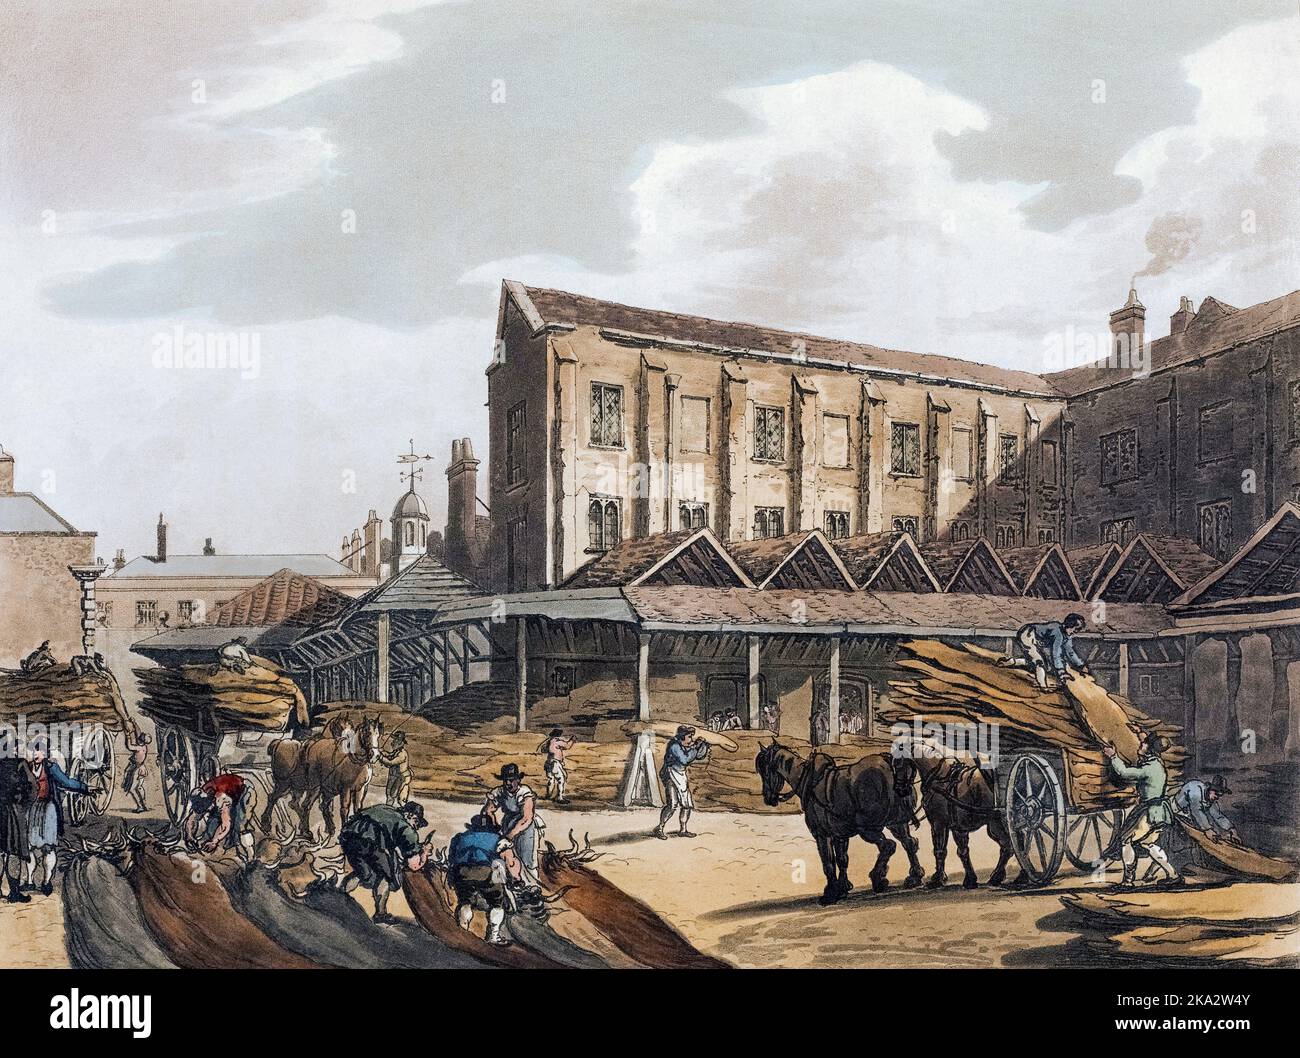 Leaden Hall Market, Circa 1808.  After a work by August Pugin and Thomas Rowlandson in the Microcosm of London, published in three volumes between 1808 and 1810 by Rudolph Ackermann.  Pugin was the artist responsible for the architectural elements in the Microcosm pictures; Thomas Rowlandson was hired to add the lively human figures. Stock Photo